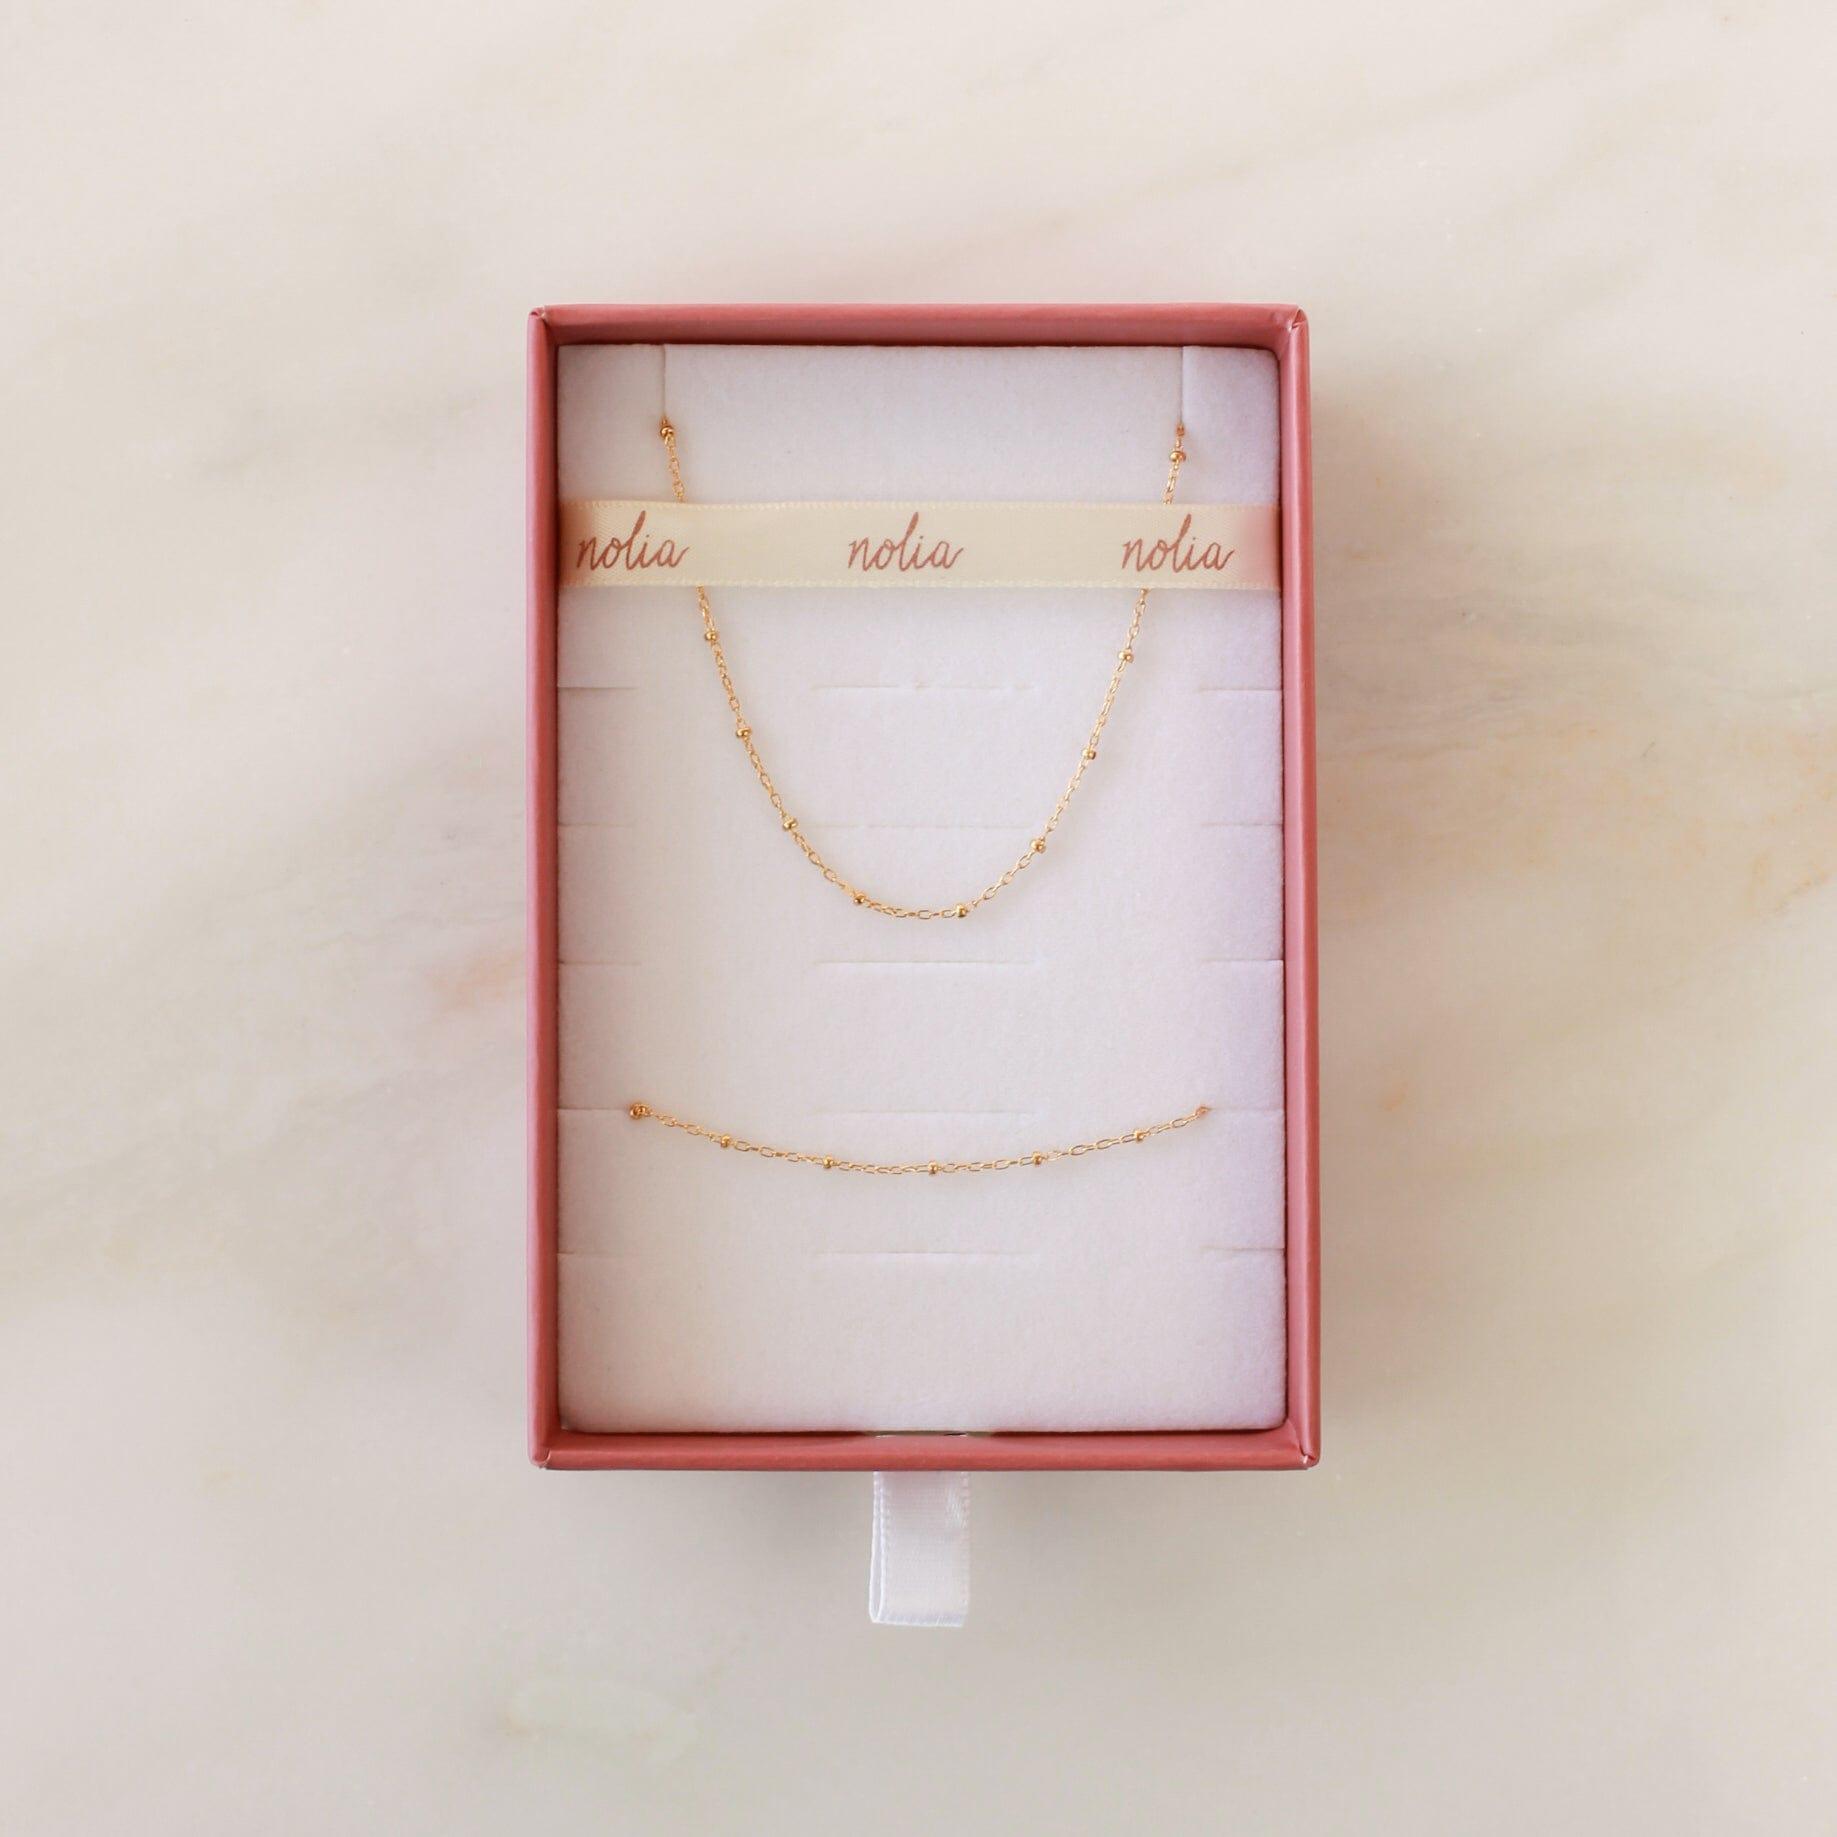 Satellite Chain Gift Set - Nolia Jewelry - Meaningful + Sustainably Handcrafted Jewelry